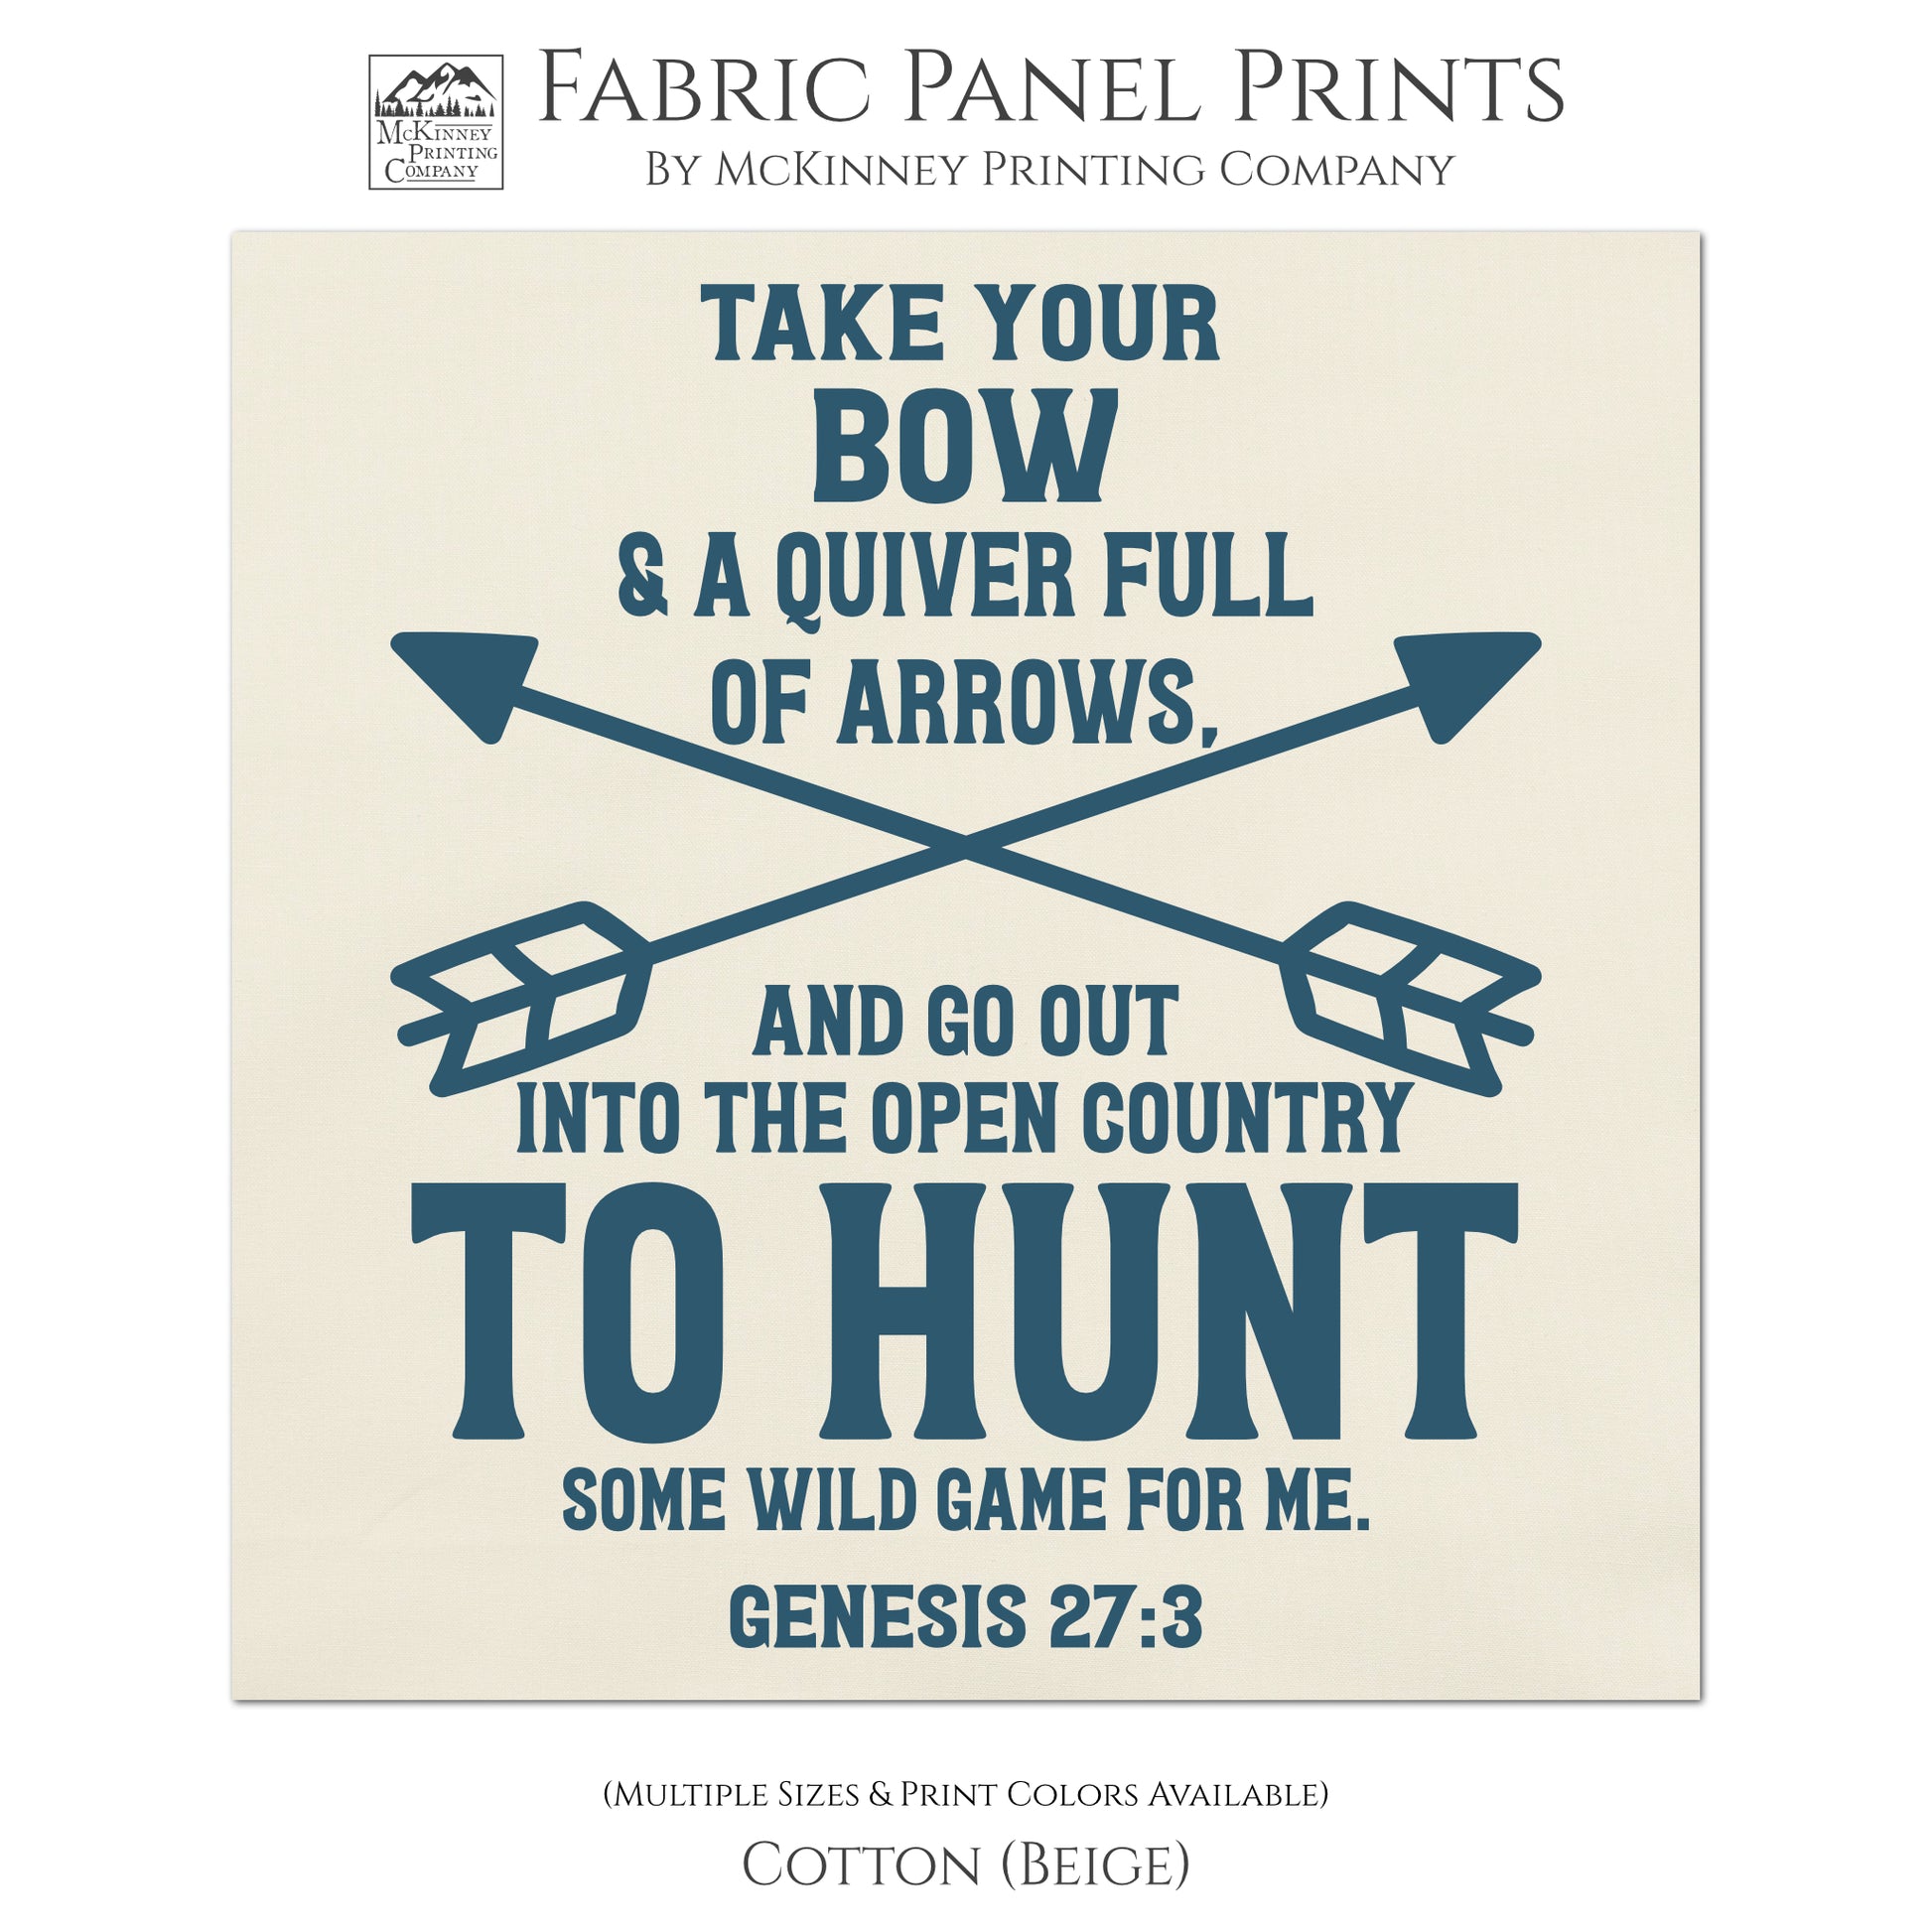 Take you box and a quiver full of arrows and go out into the open country to hunt some wild game for me. - Genesis 27:3 - Religious Fabric, Scripture Fabric, Hunting Fabric, Wall Art, Quilting, Quilt, Crafting, Quilt Block, Print - Cotton